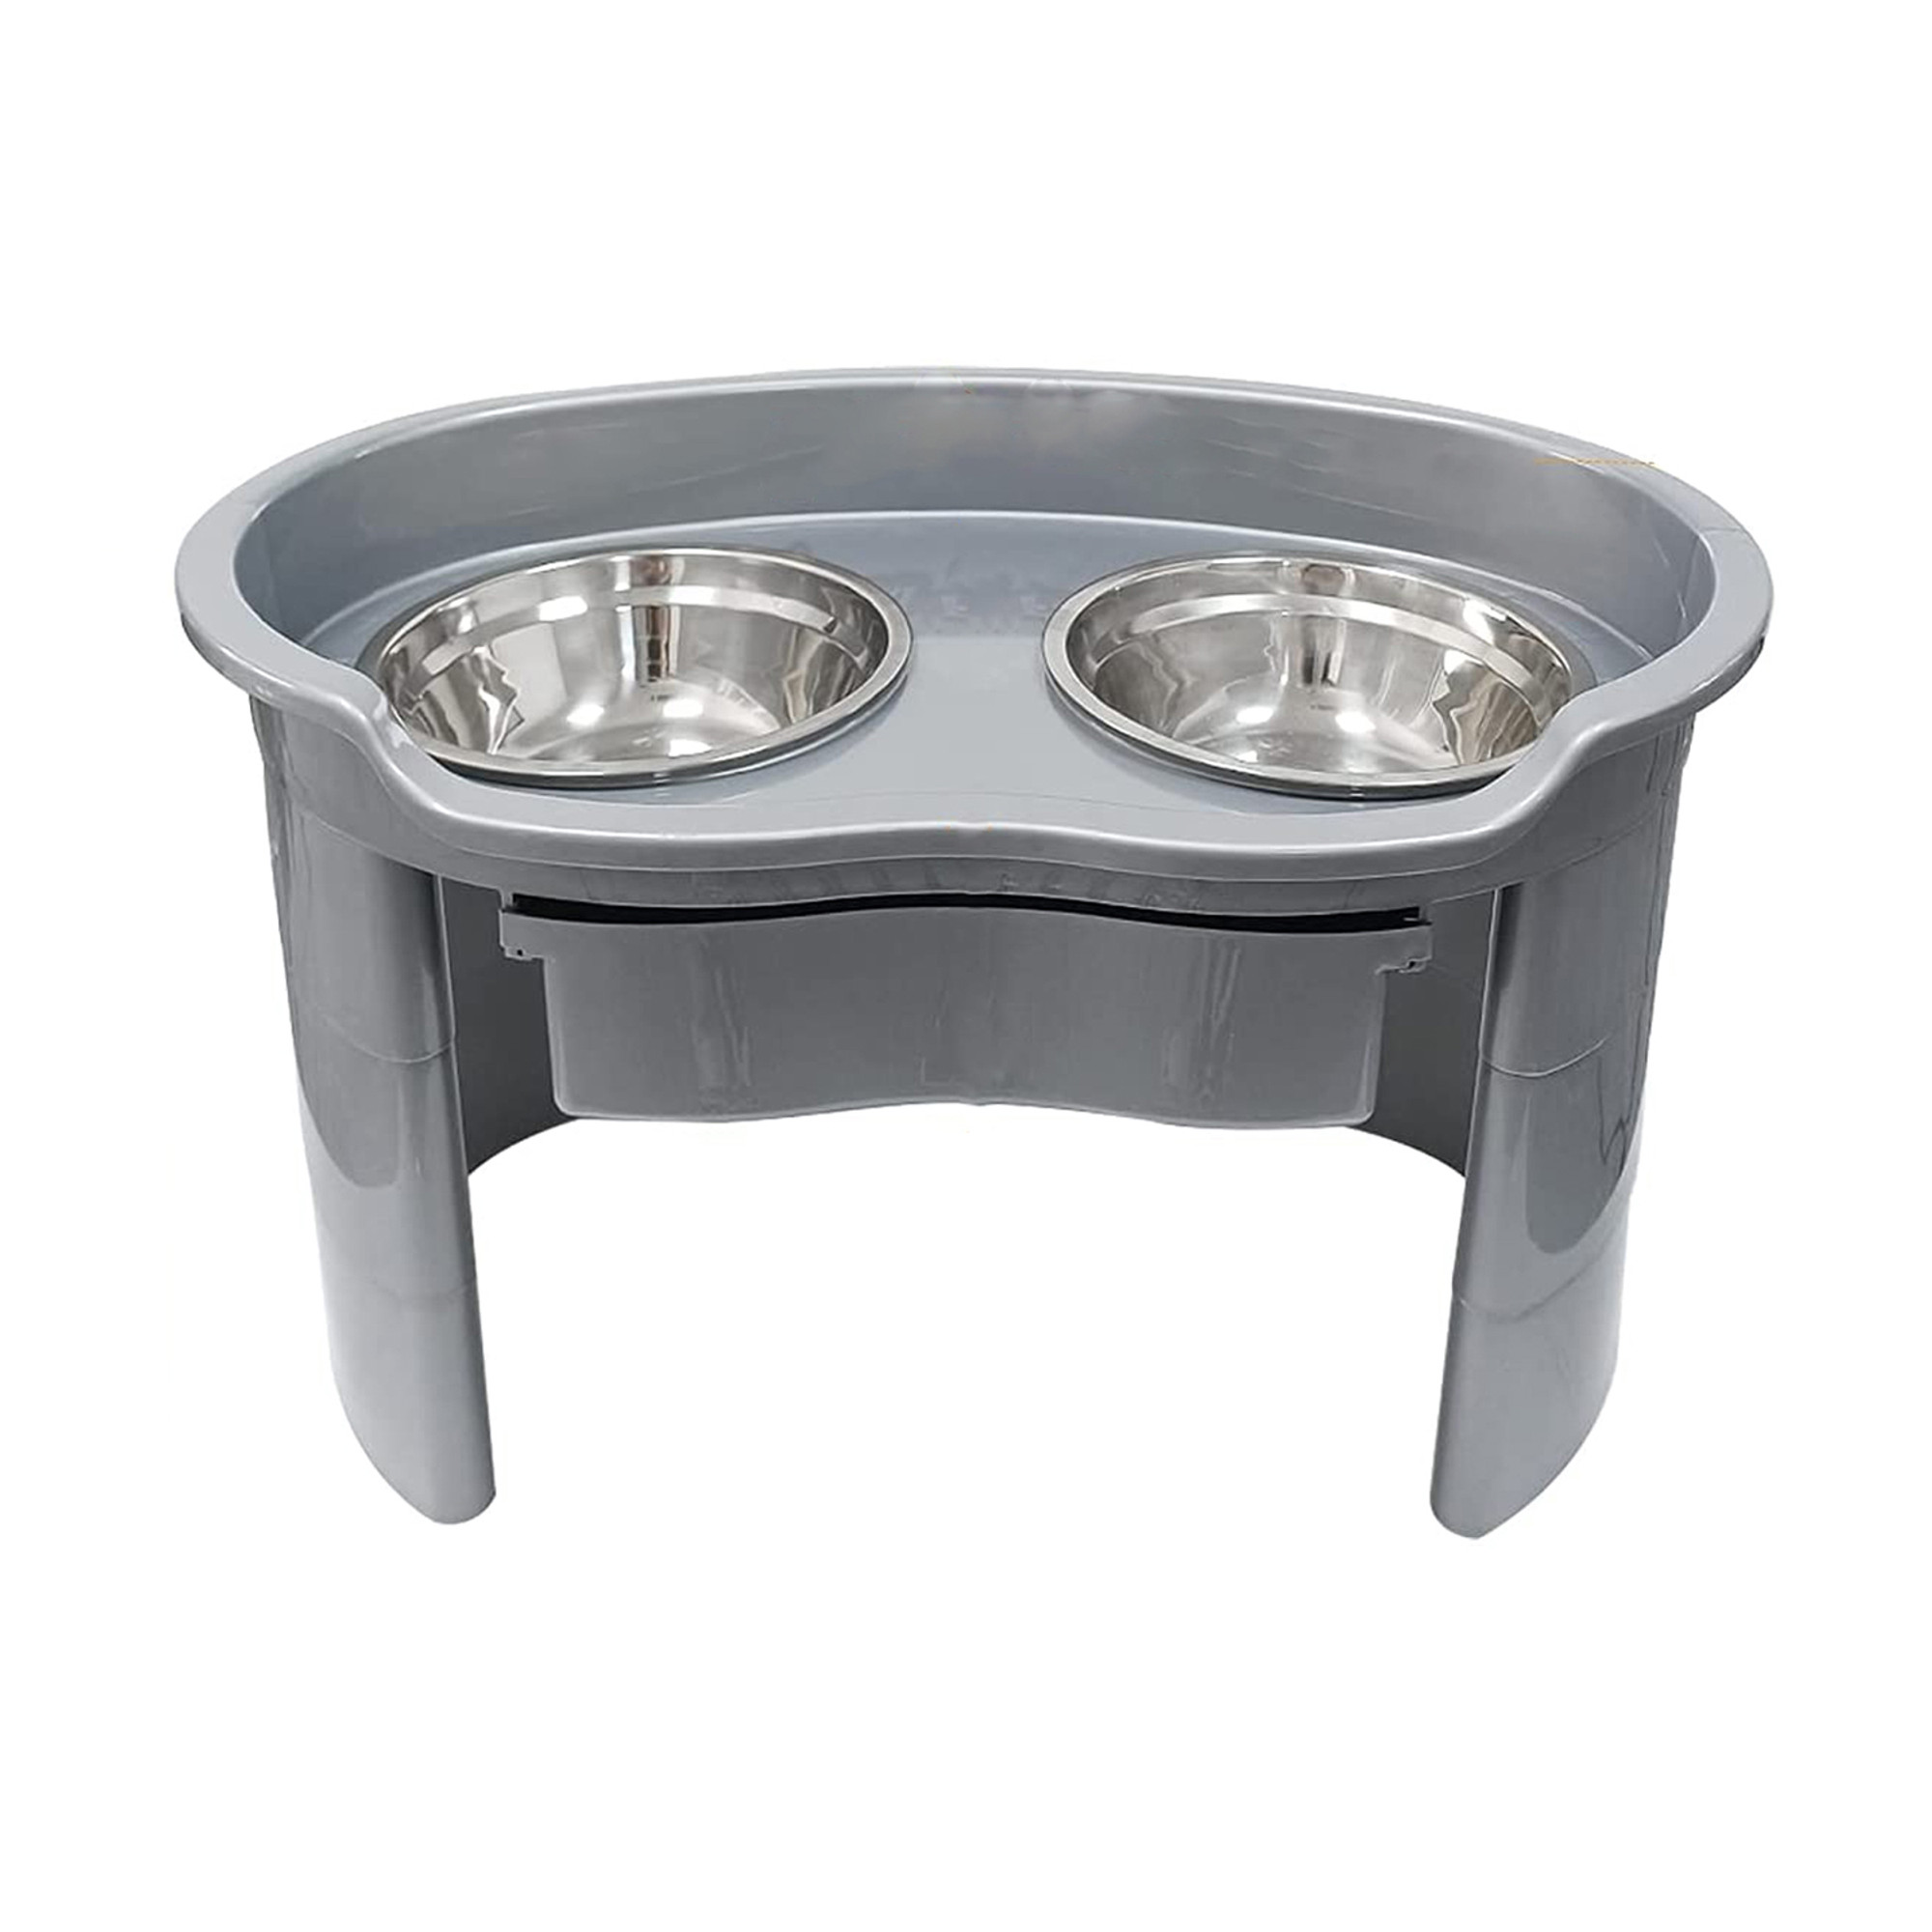 Elevated Dog Bowls with 2 Stainless Steel Dog Food Bowls, Raised Dog Bowl  Adjusts to 5 Heights for Small Medium and Large Dogs, Grey 